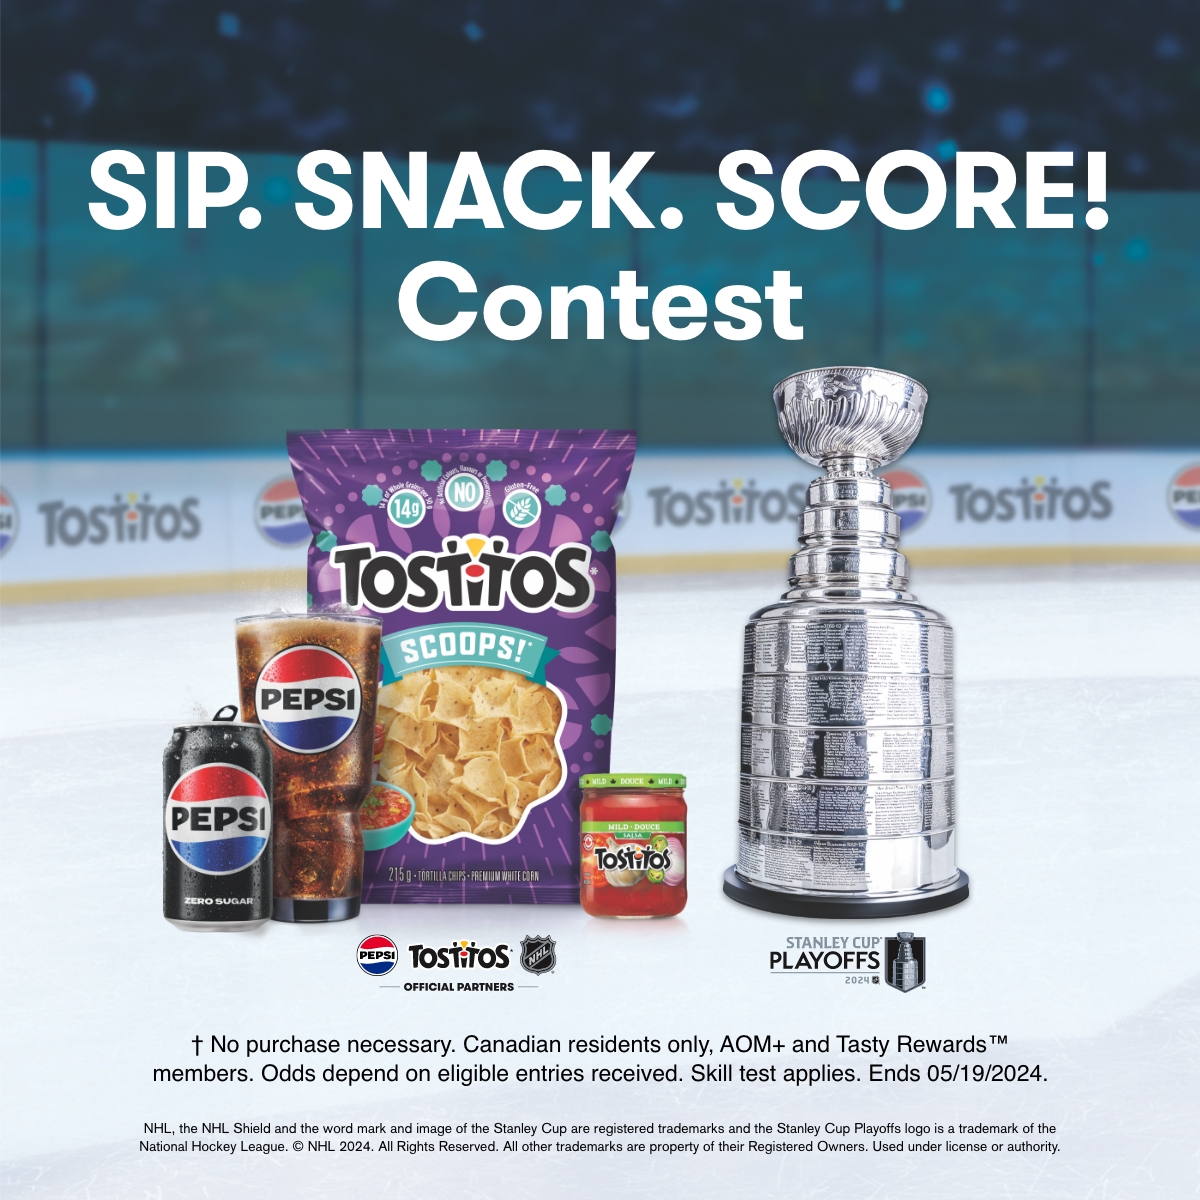 P5_2024_CAN_SIP. SNACK. SCORE! Contest